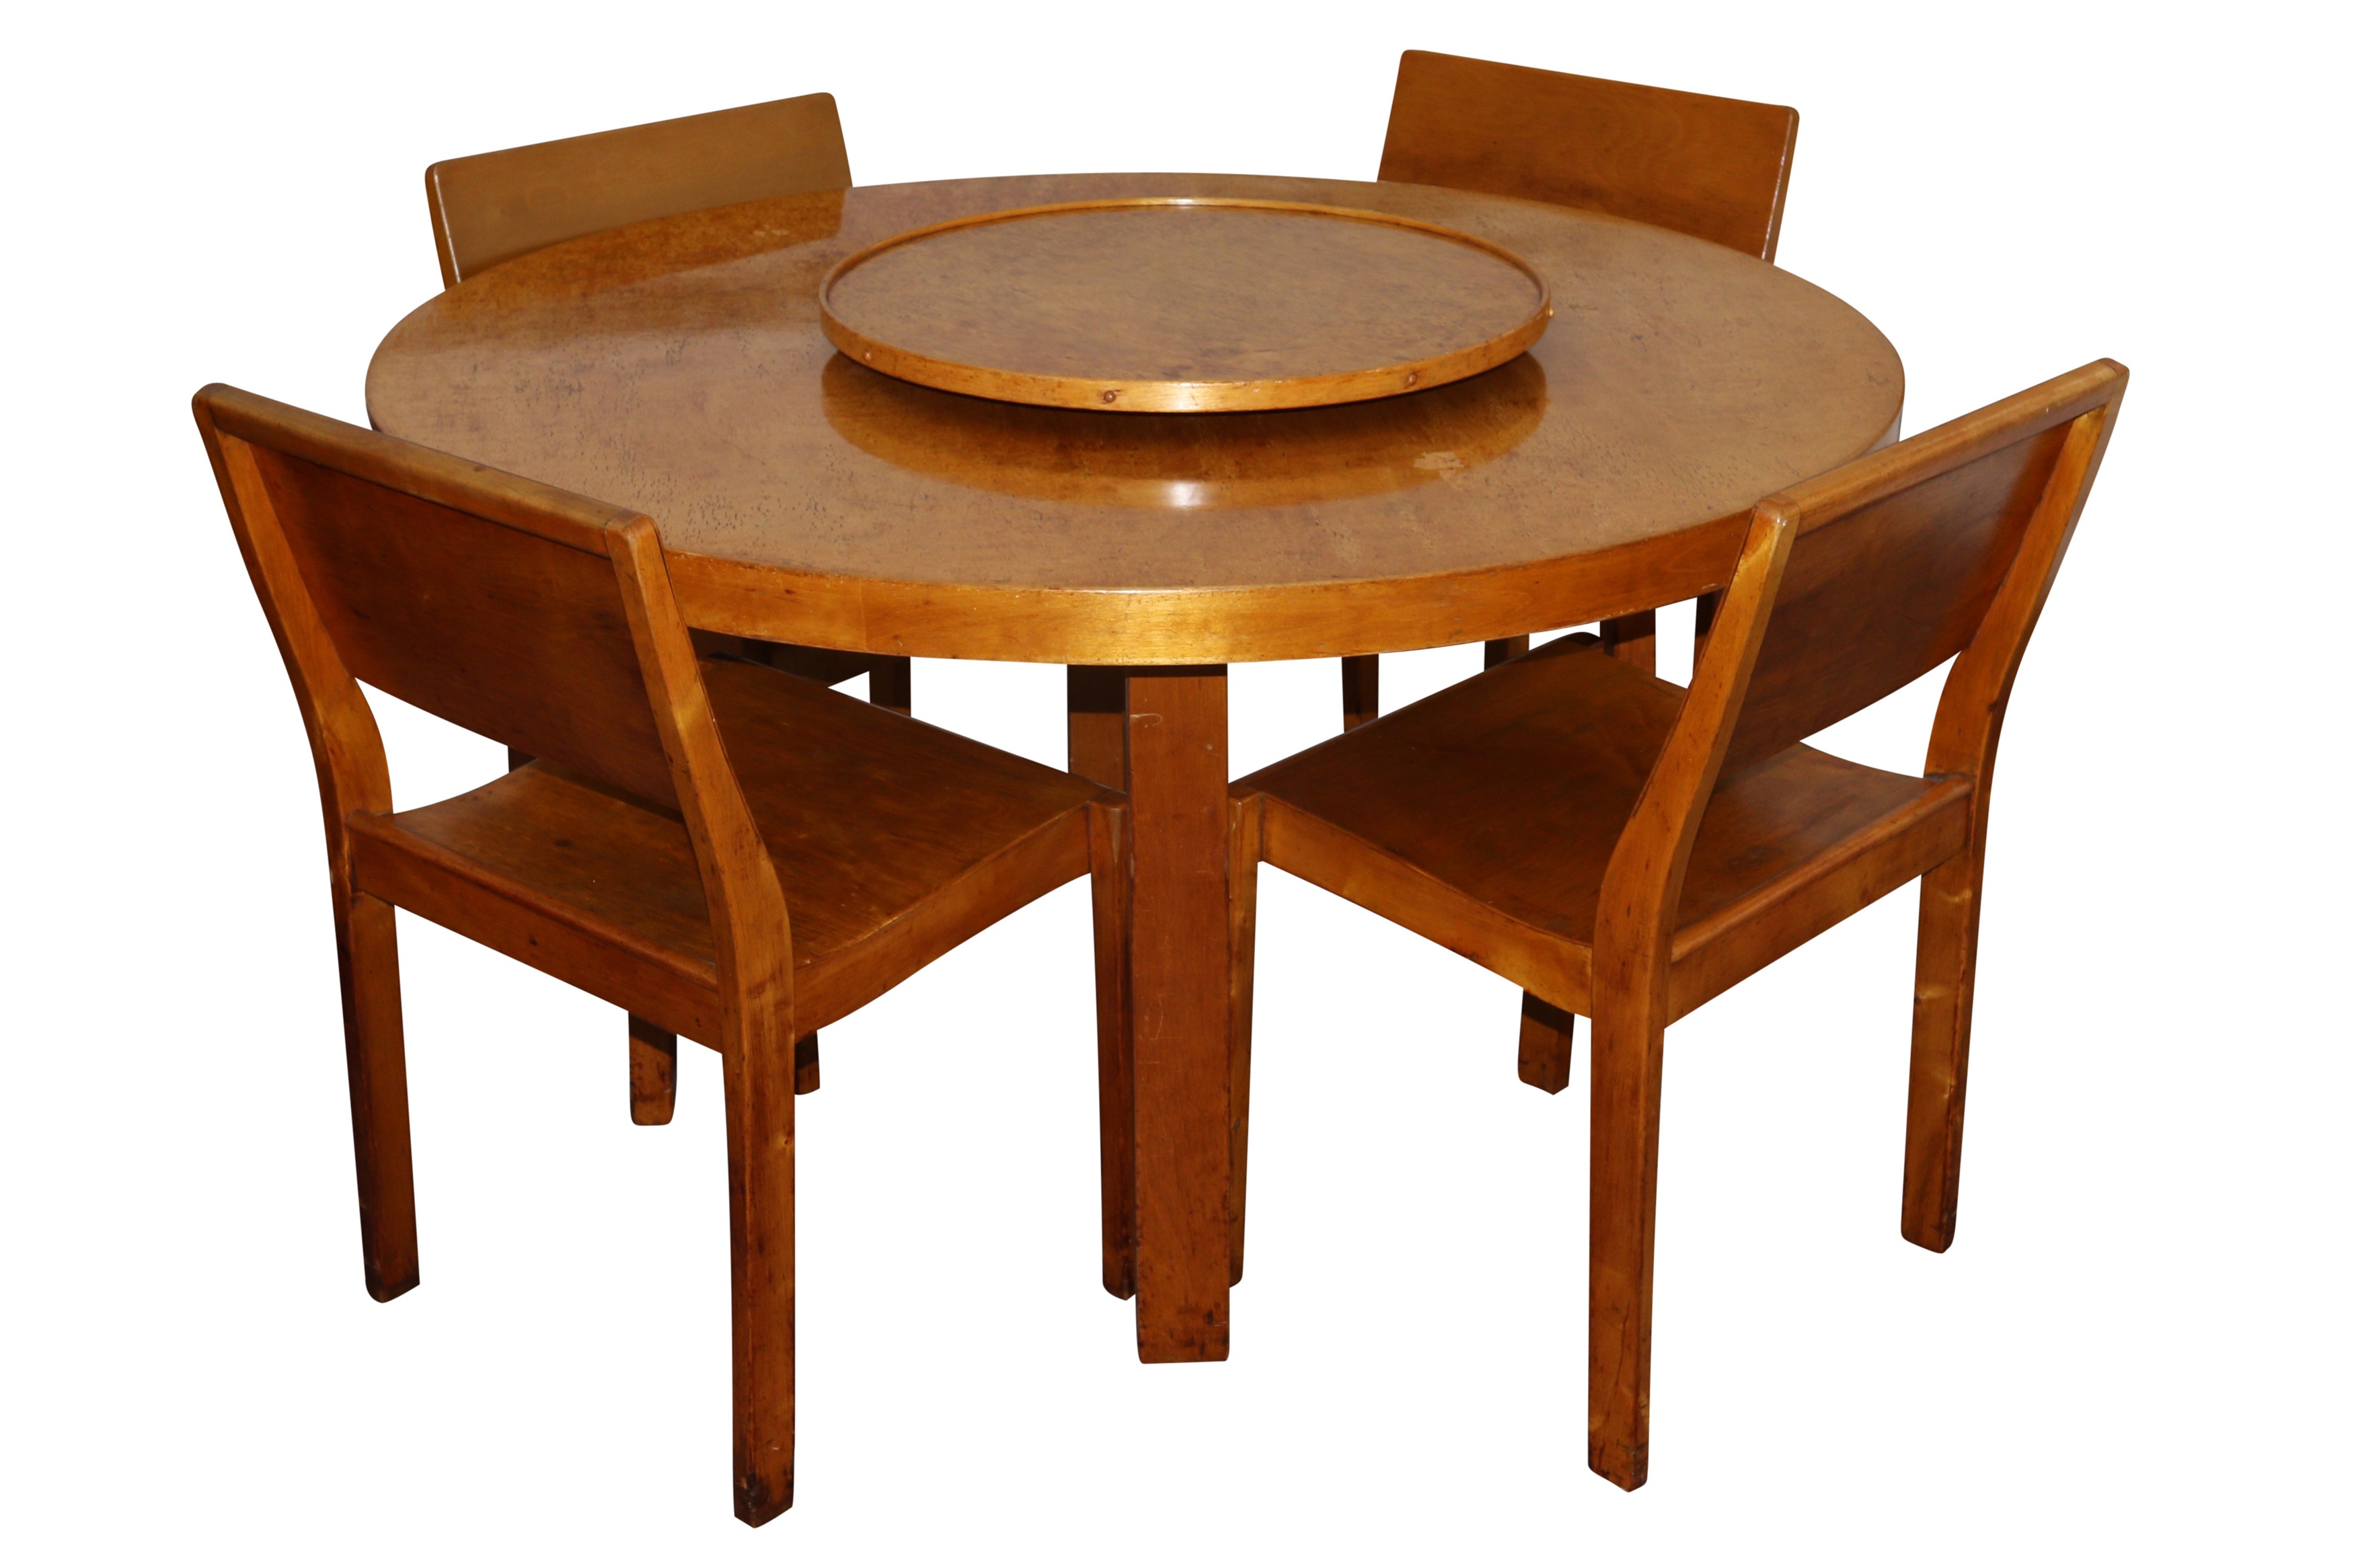 ALVAR AALTO FOR FINMAR LTD, FINLAND: Table 91 with lazy susan